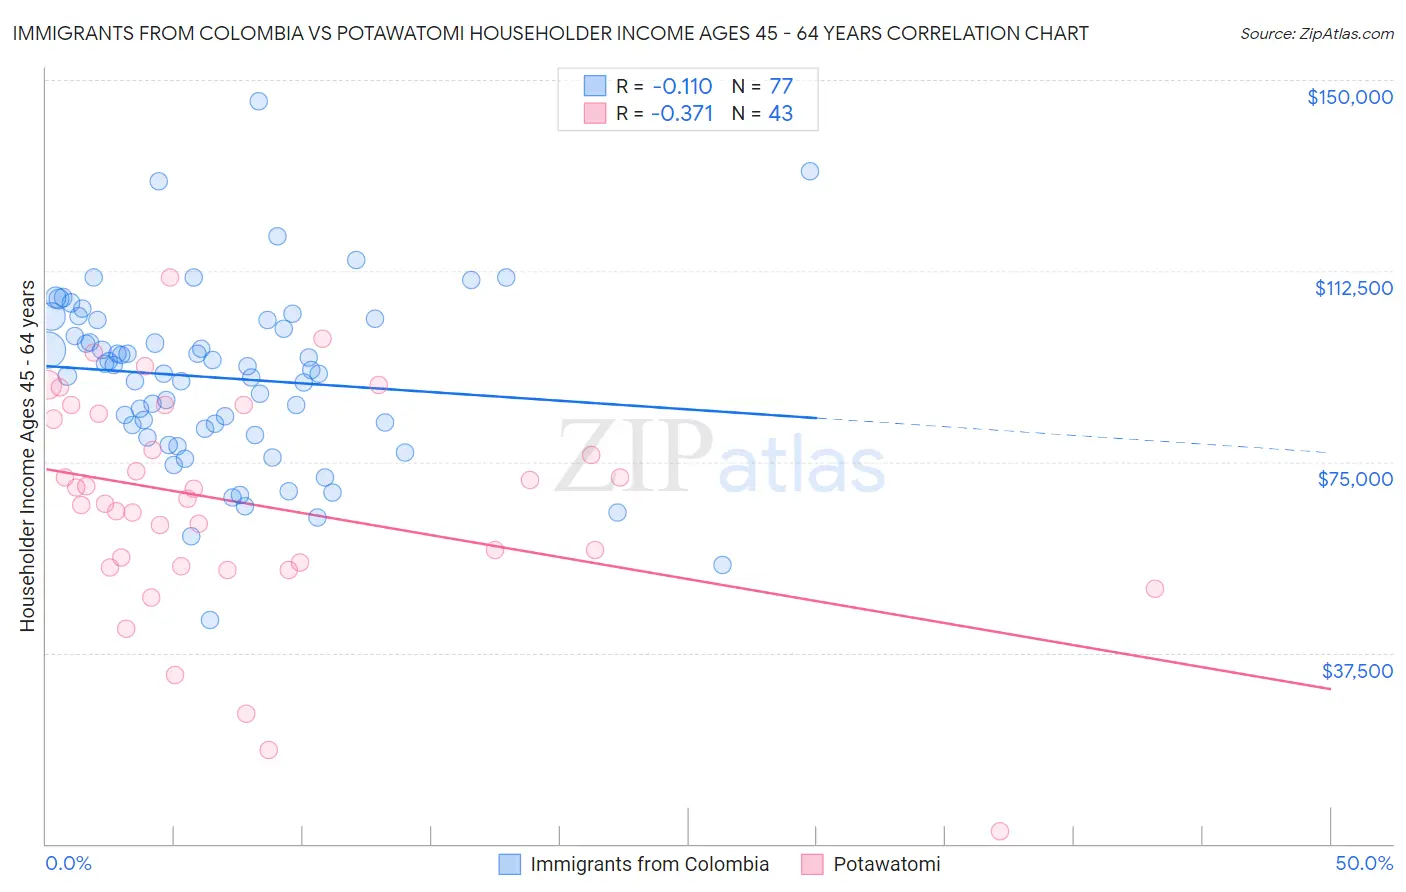 Immigrants from Colombia vs Potawatomi Householder Income Ages 45 - 64 years